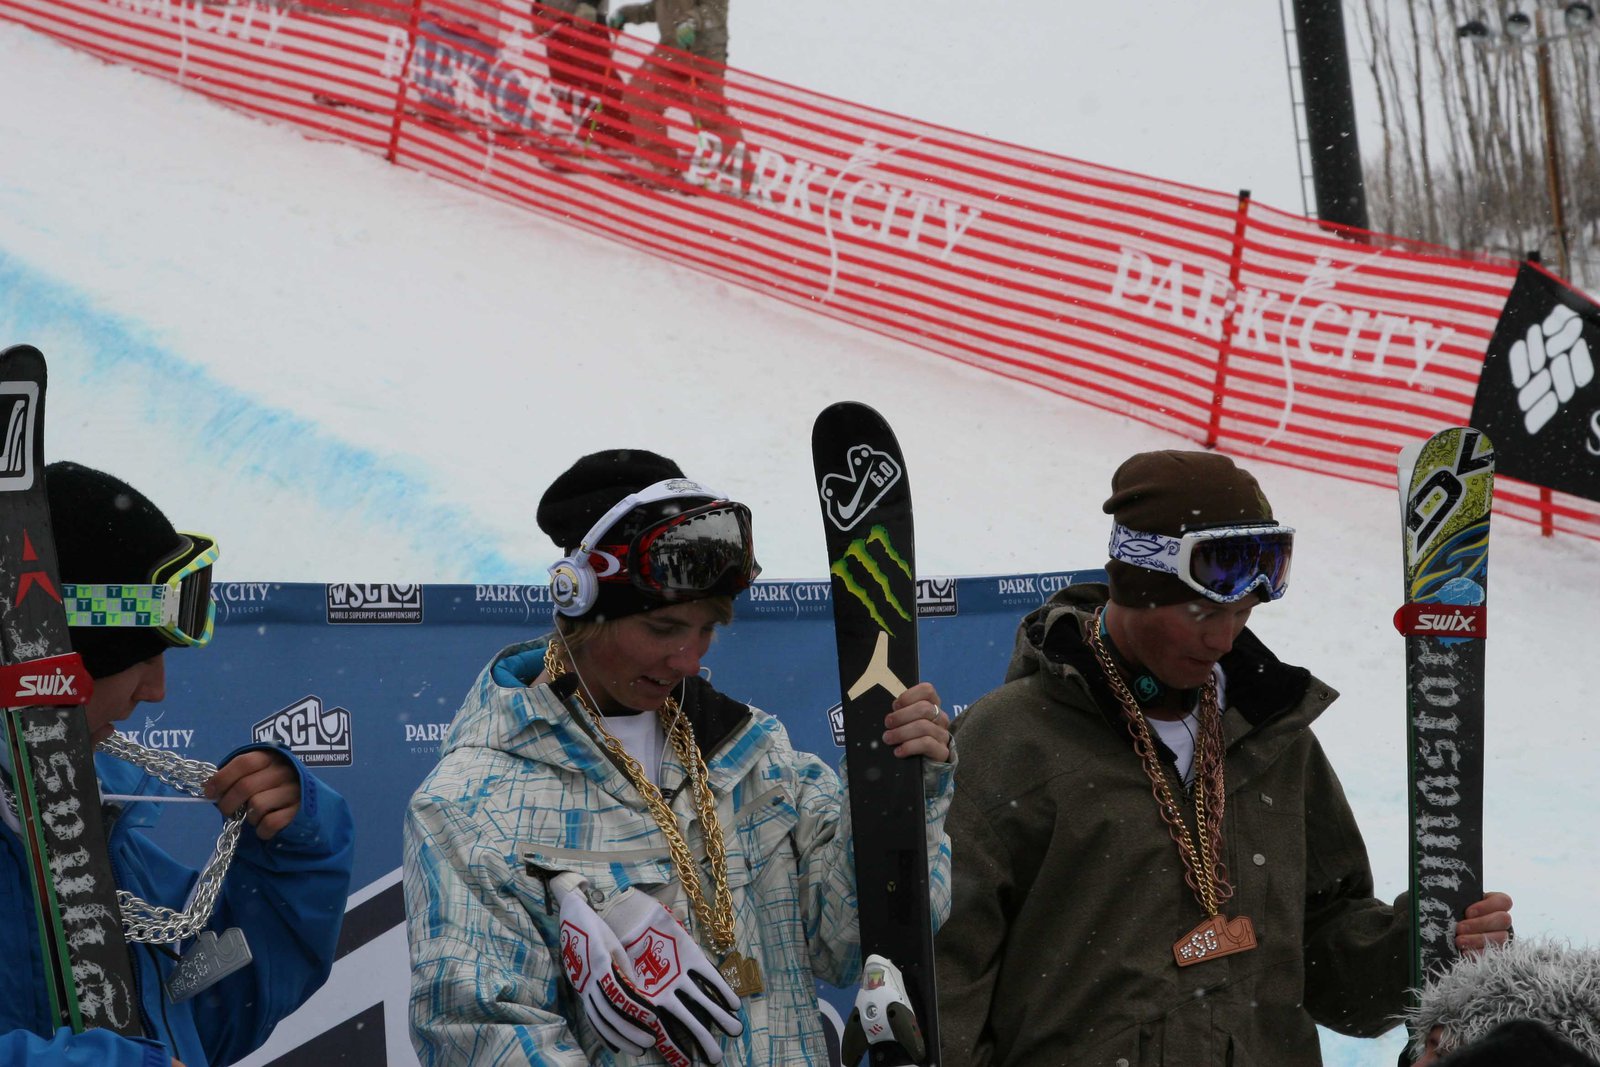 World Superpipe Championship in Park City UT, Dorey 2nd, Riddle 3rd